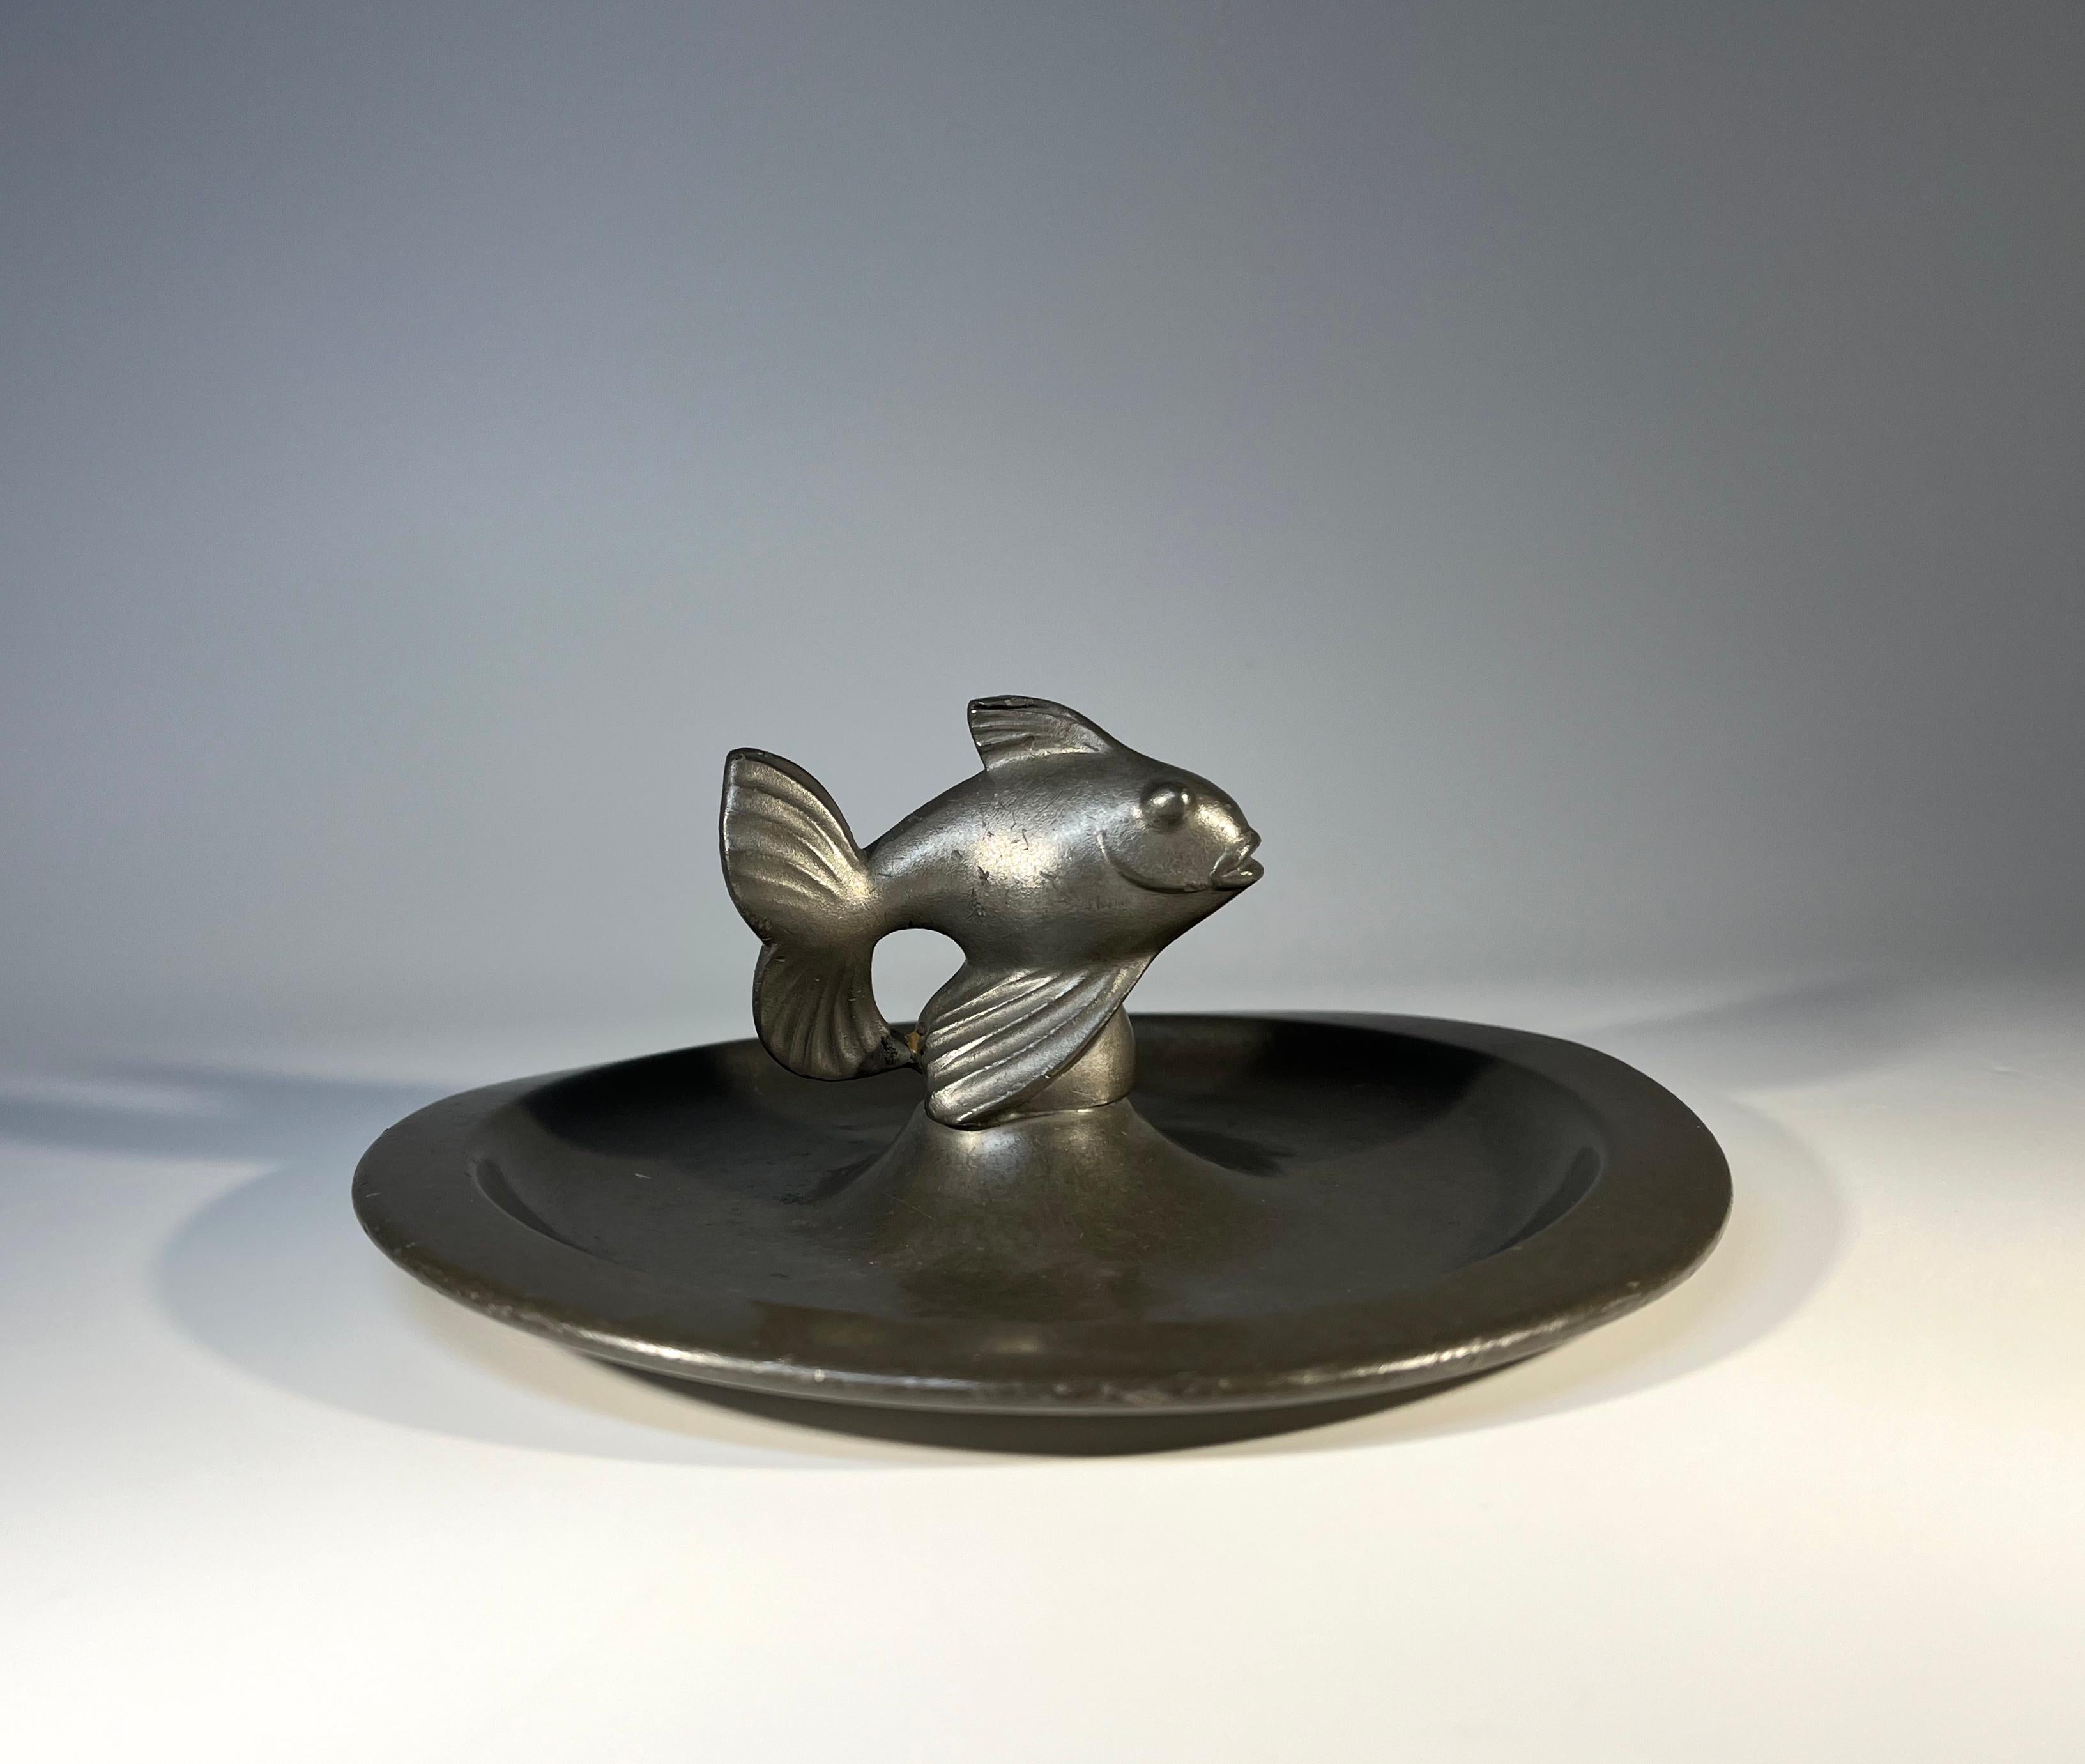 Just Andersen, Denmark 1930s Art Deco pewter stylised fish vide poche
Circa 1930's
Stamped and numbered 1656B on base
Diameter 6 inch, Height 2.5 inch
Remarkably good condition with a dark patina
Wear consistent with age and use